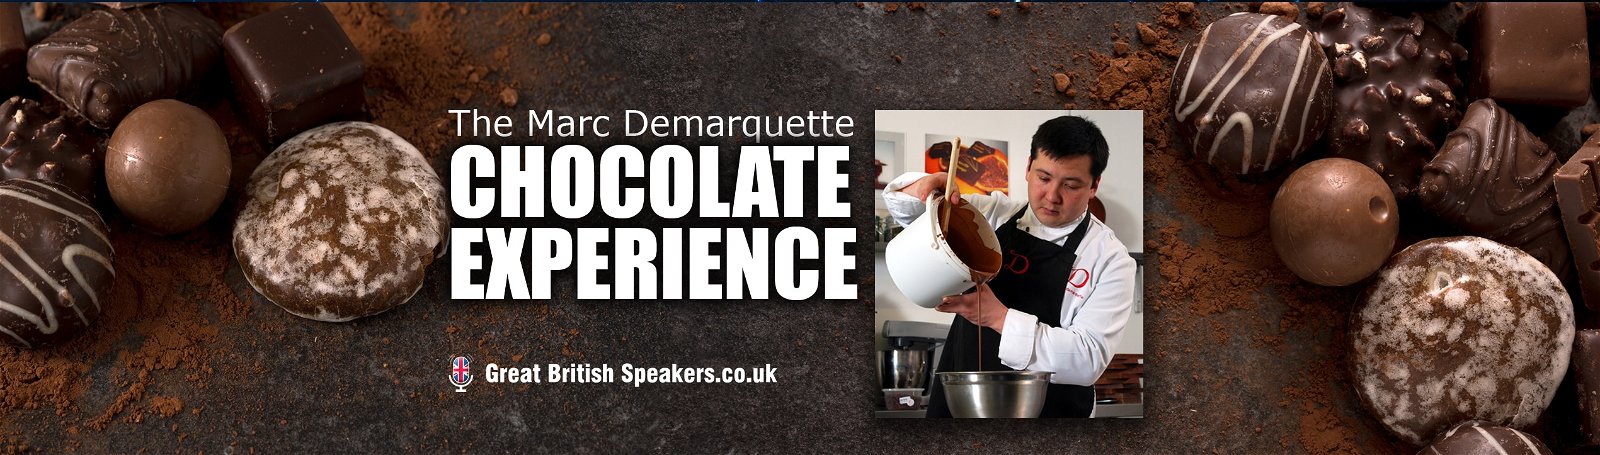 Demarquette Chocolate Experience from Great British Speakers